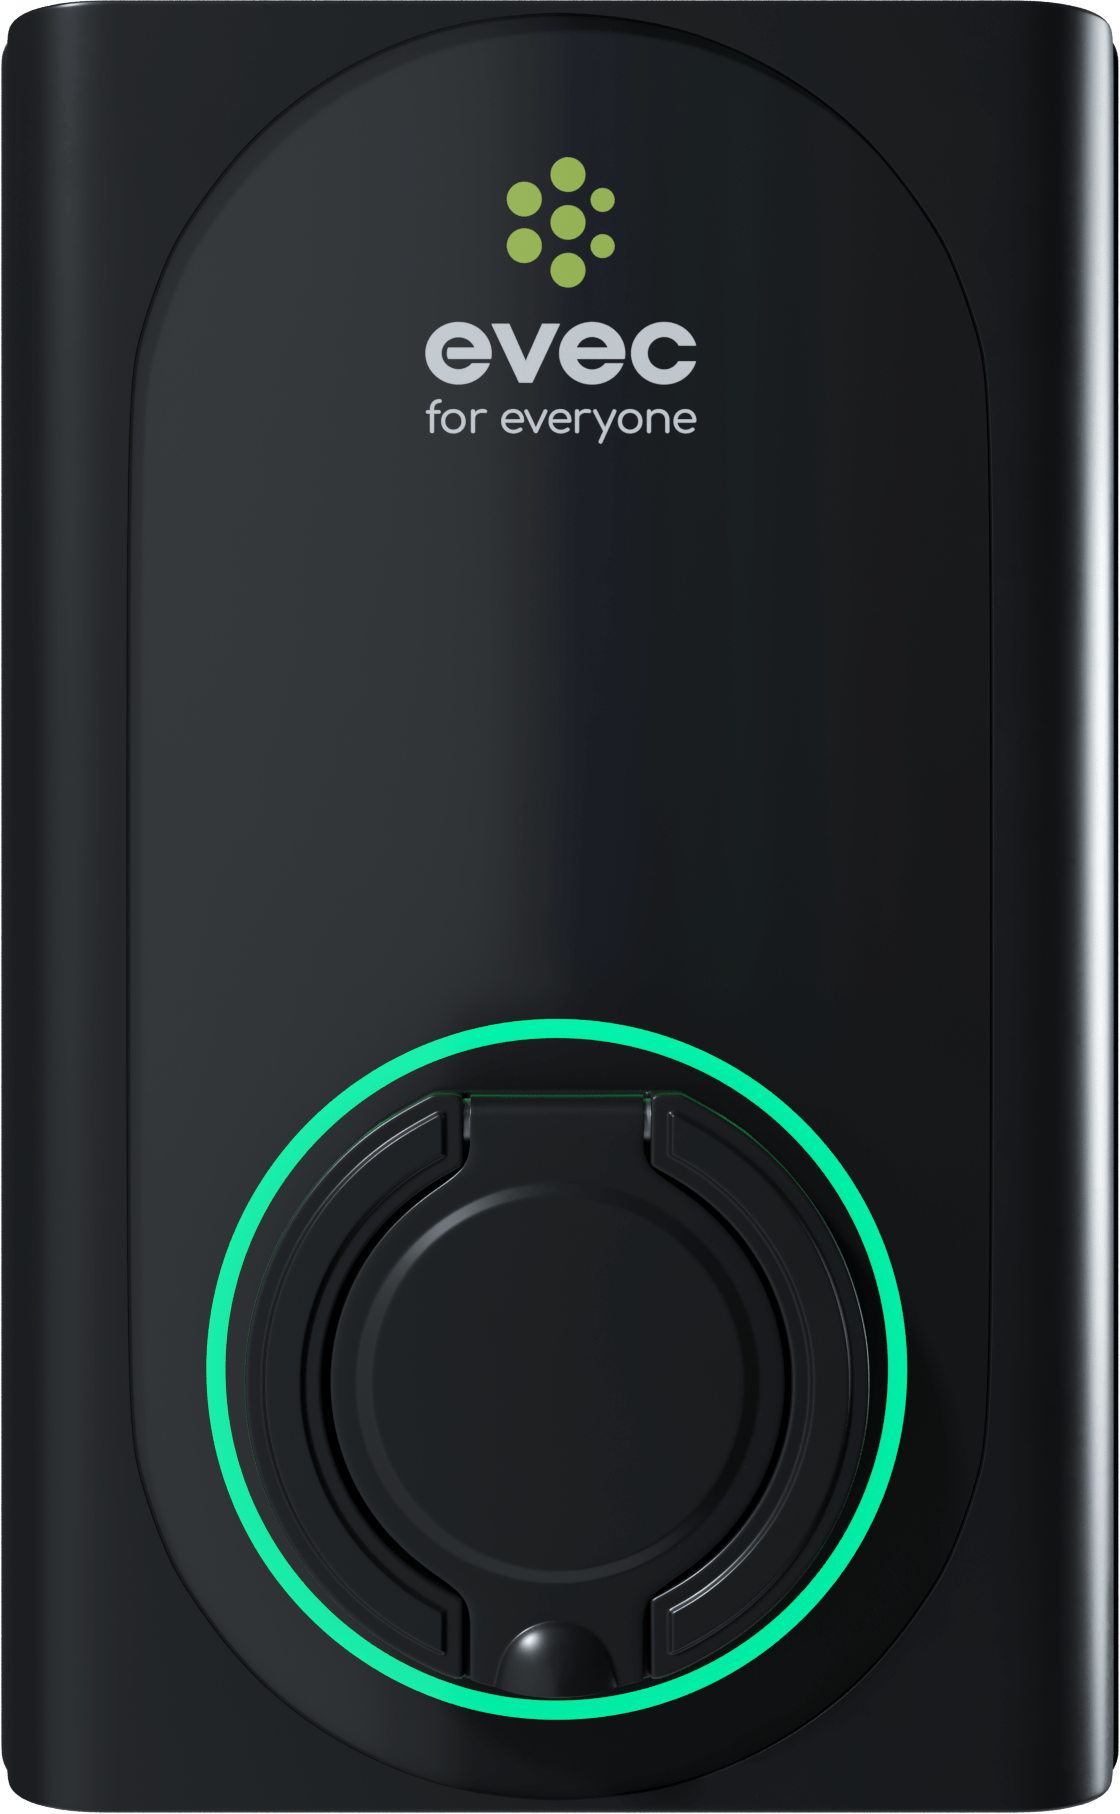 Evec Wall Charger Installation